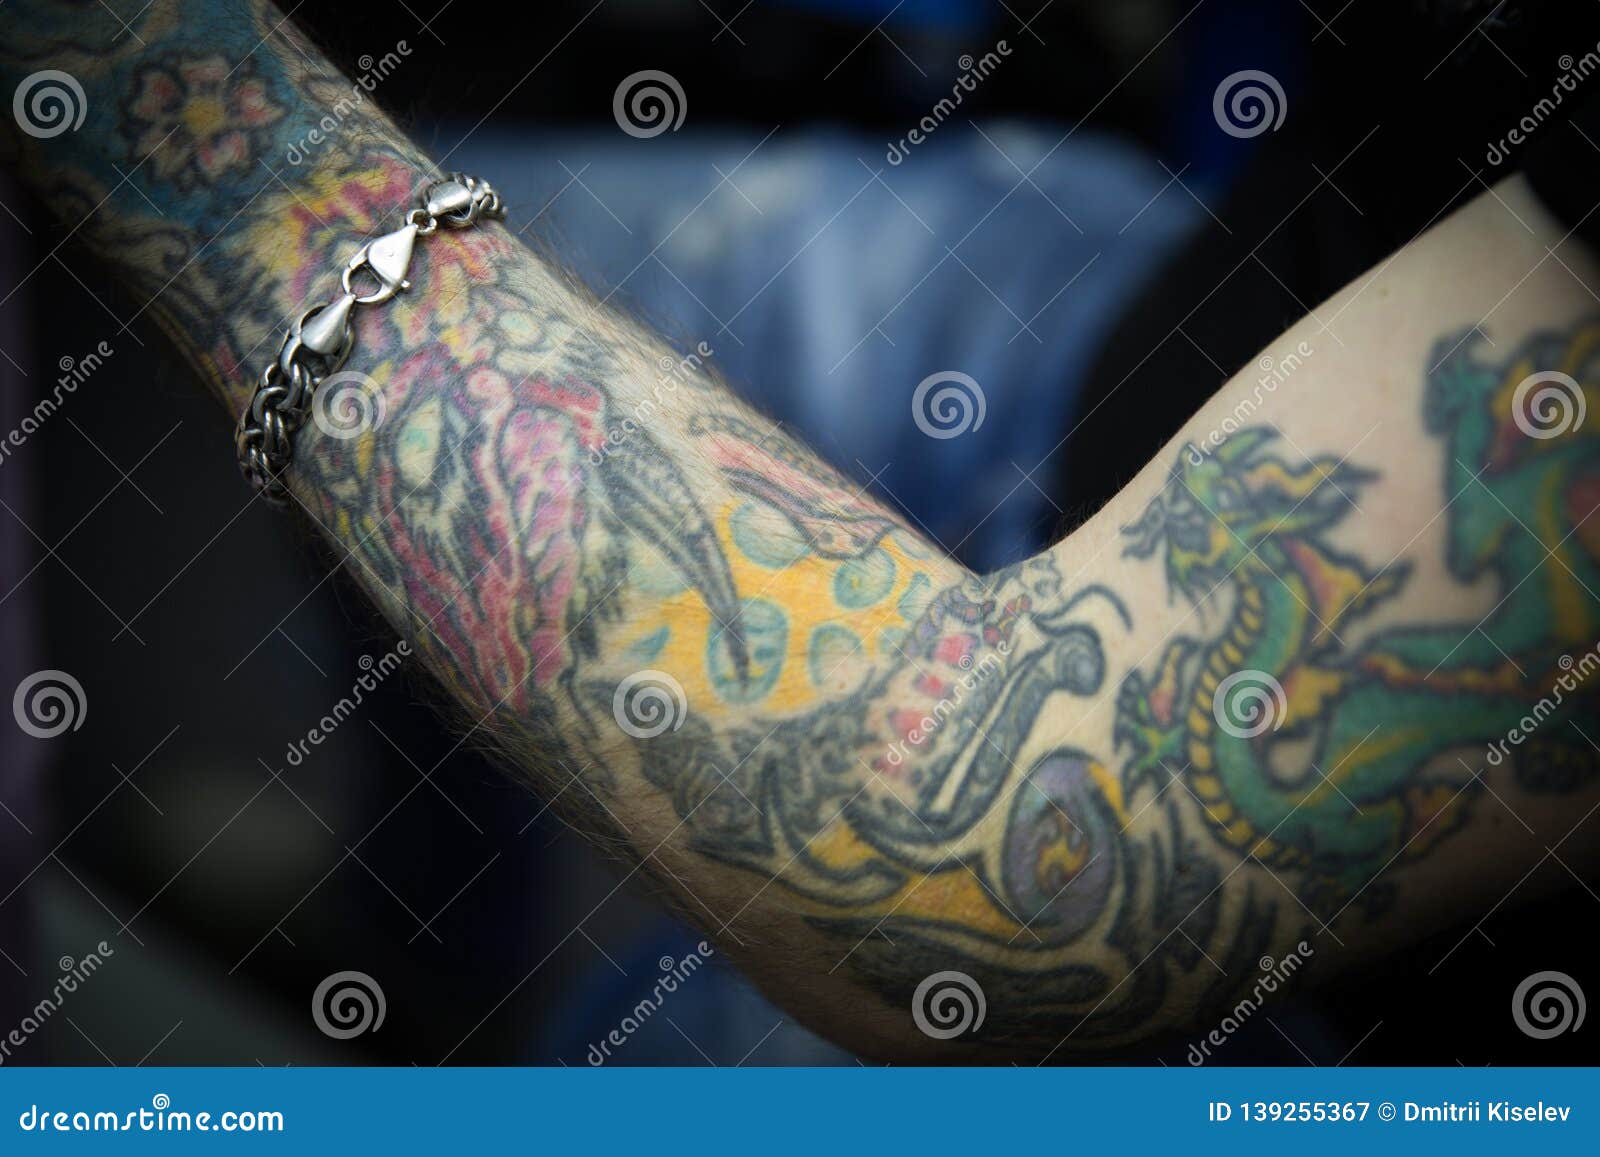 Premium Photo | A man with a tattoo on his arm